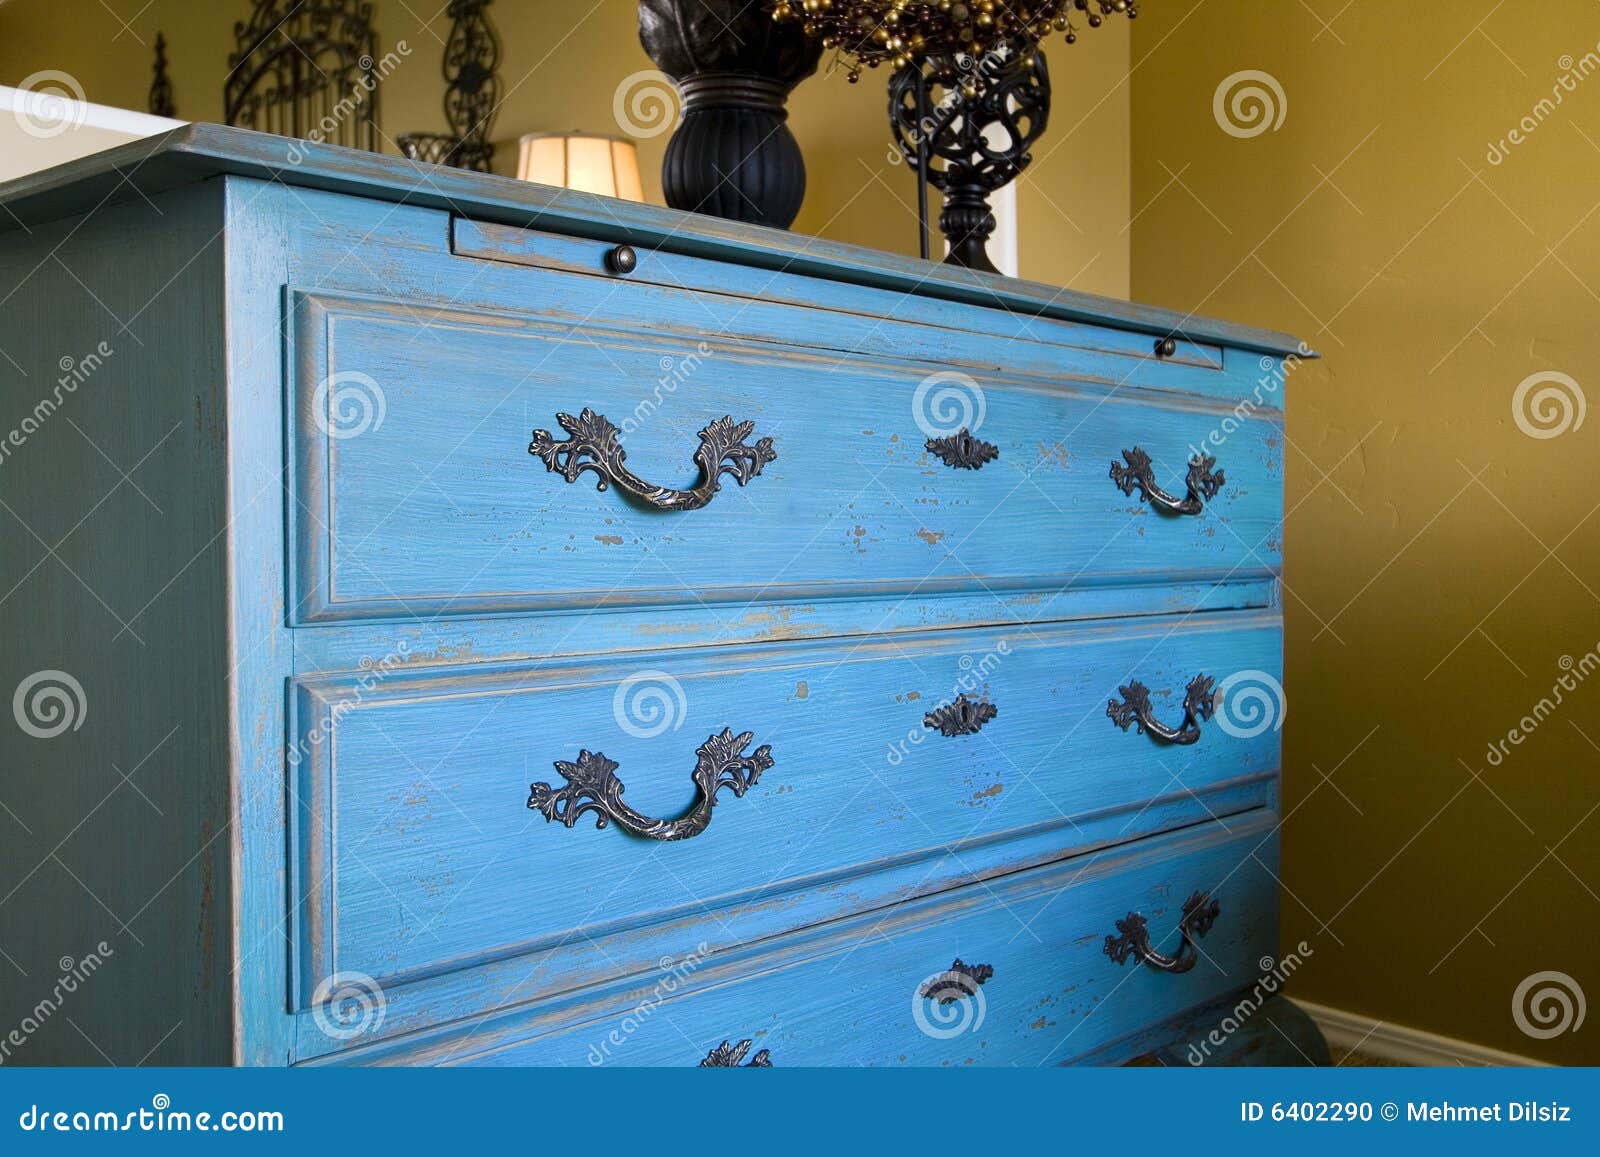 close up on the drawers of a dresser